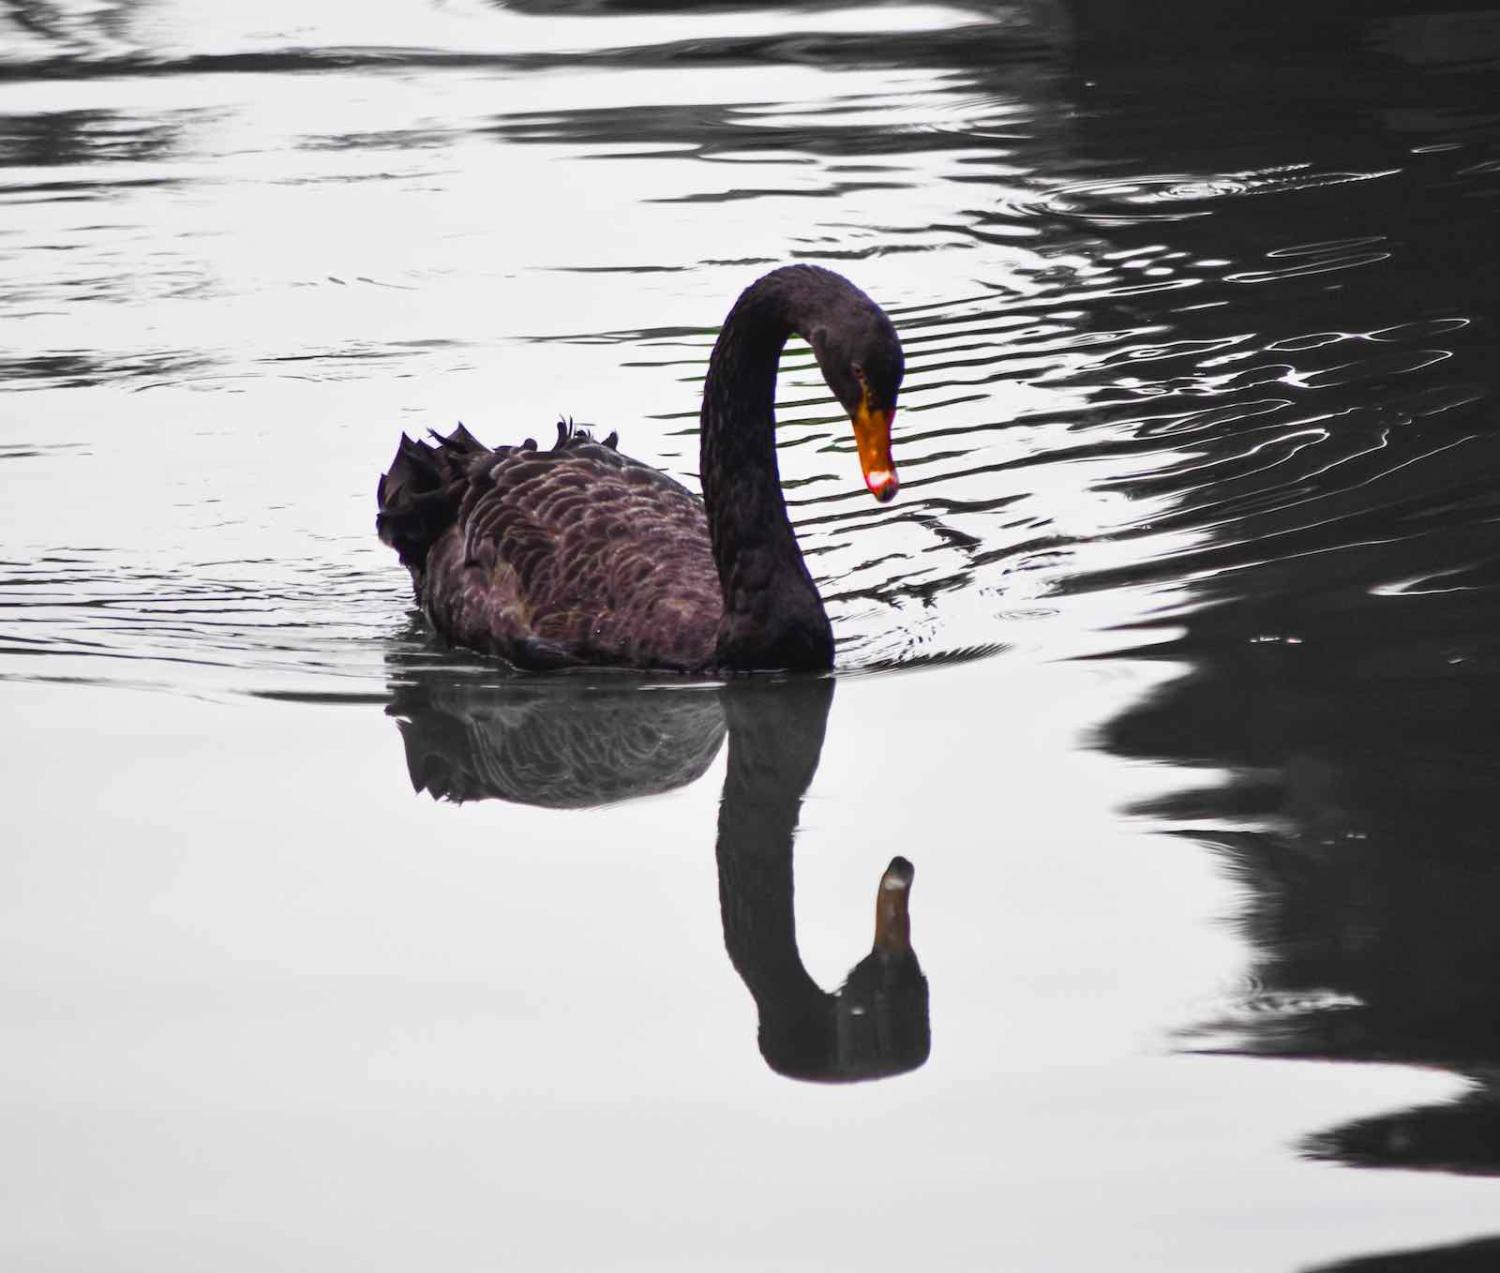 A hard look at the state of politics in Australia might avoid our own “black swan” event (Photo: Vandan Patel/unsplash)